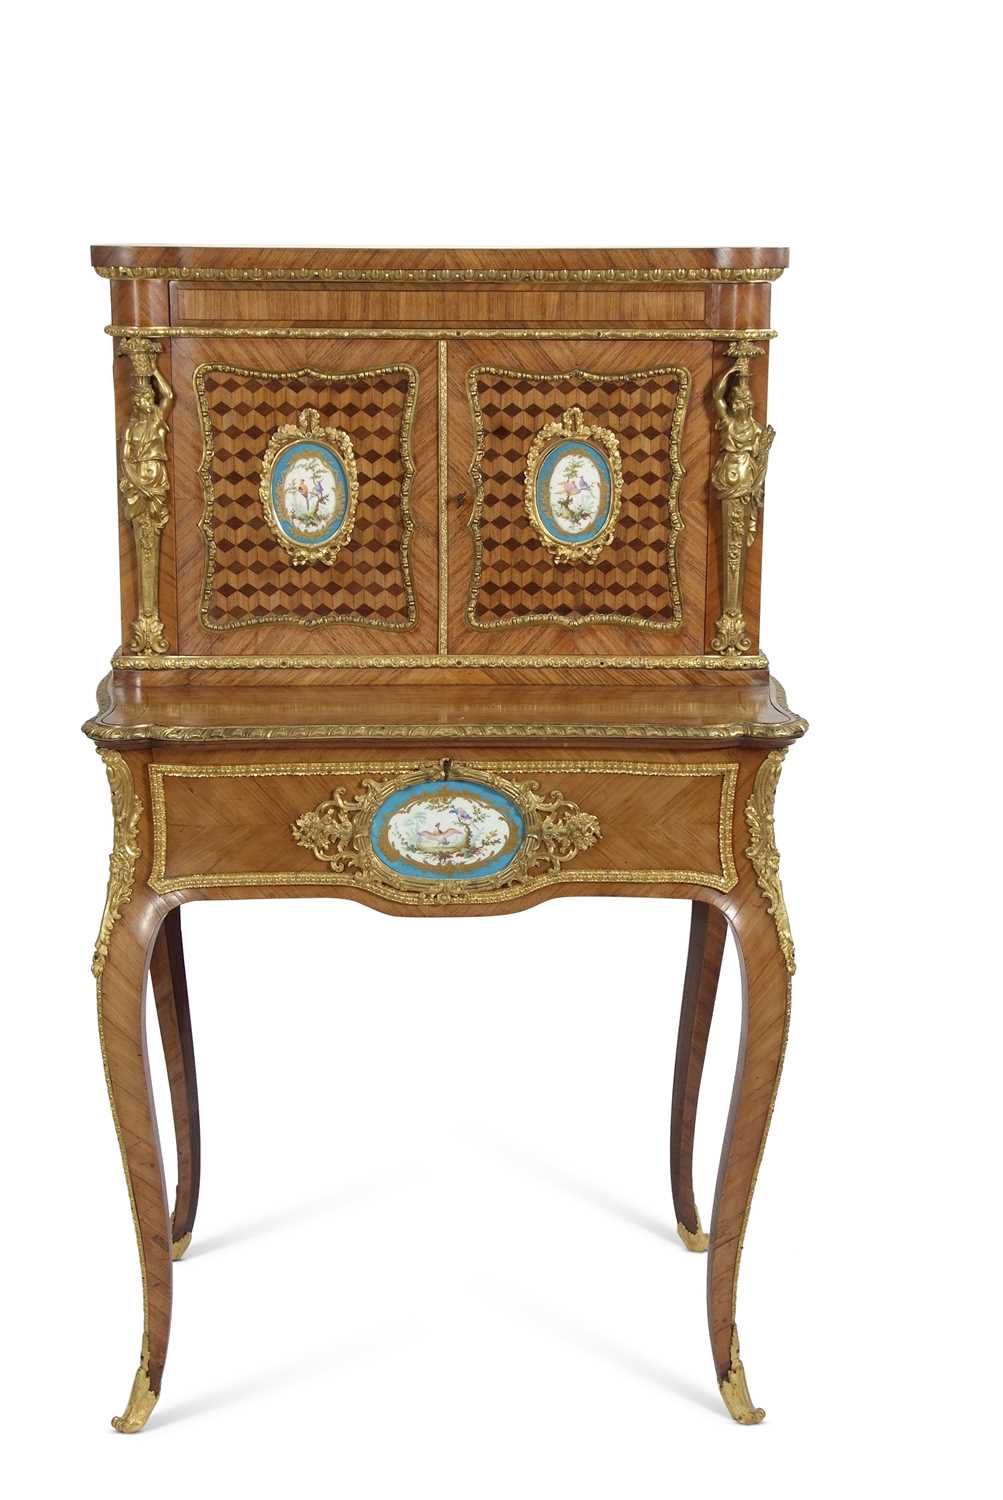 A French walnut porcelain and ormolu desk with two panelled doors to the top over a base with single